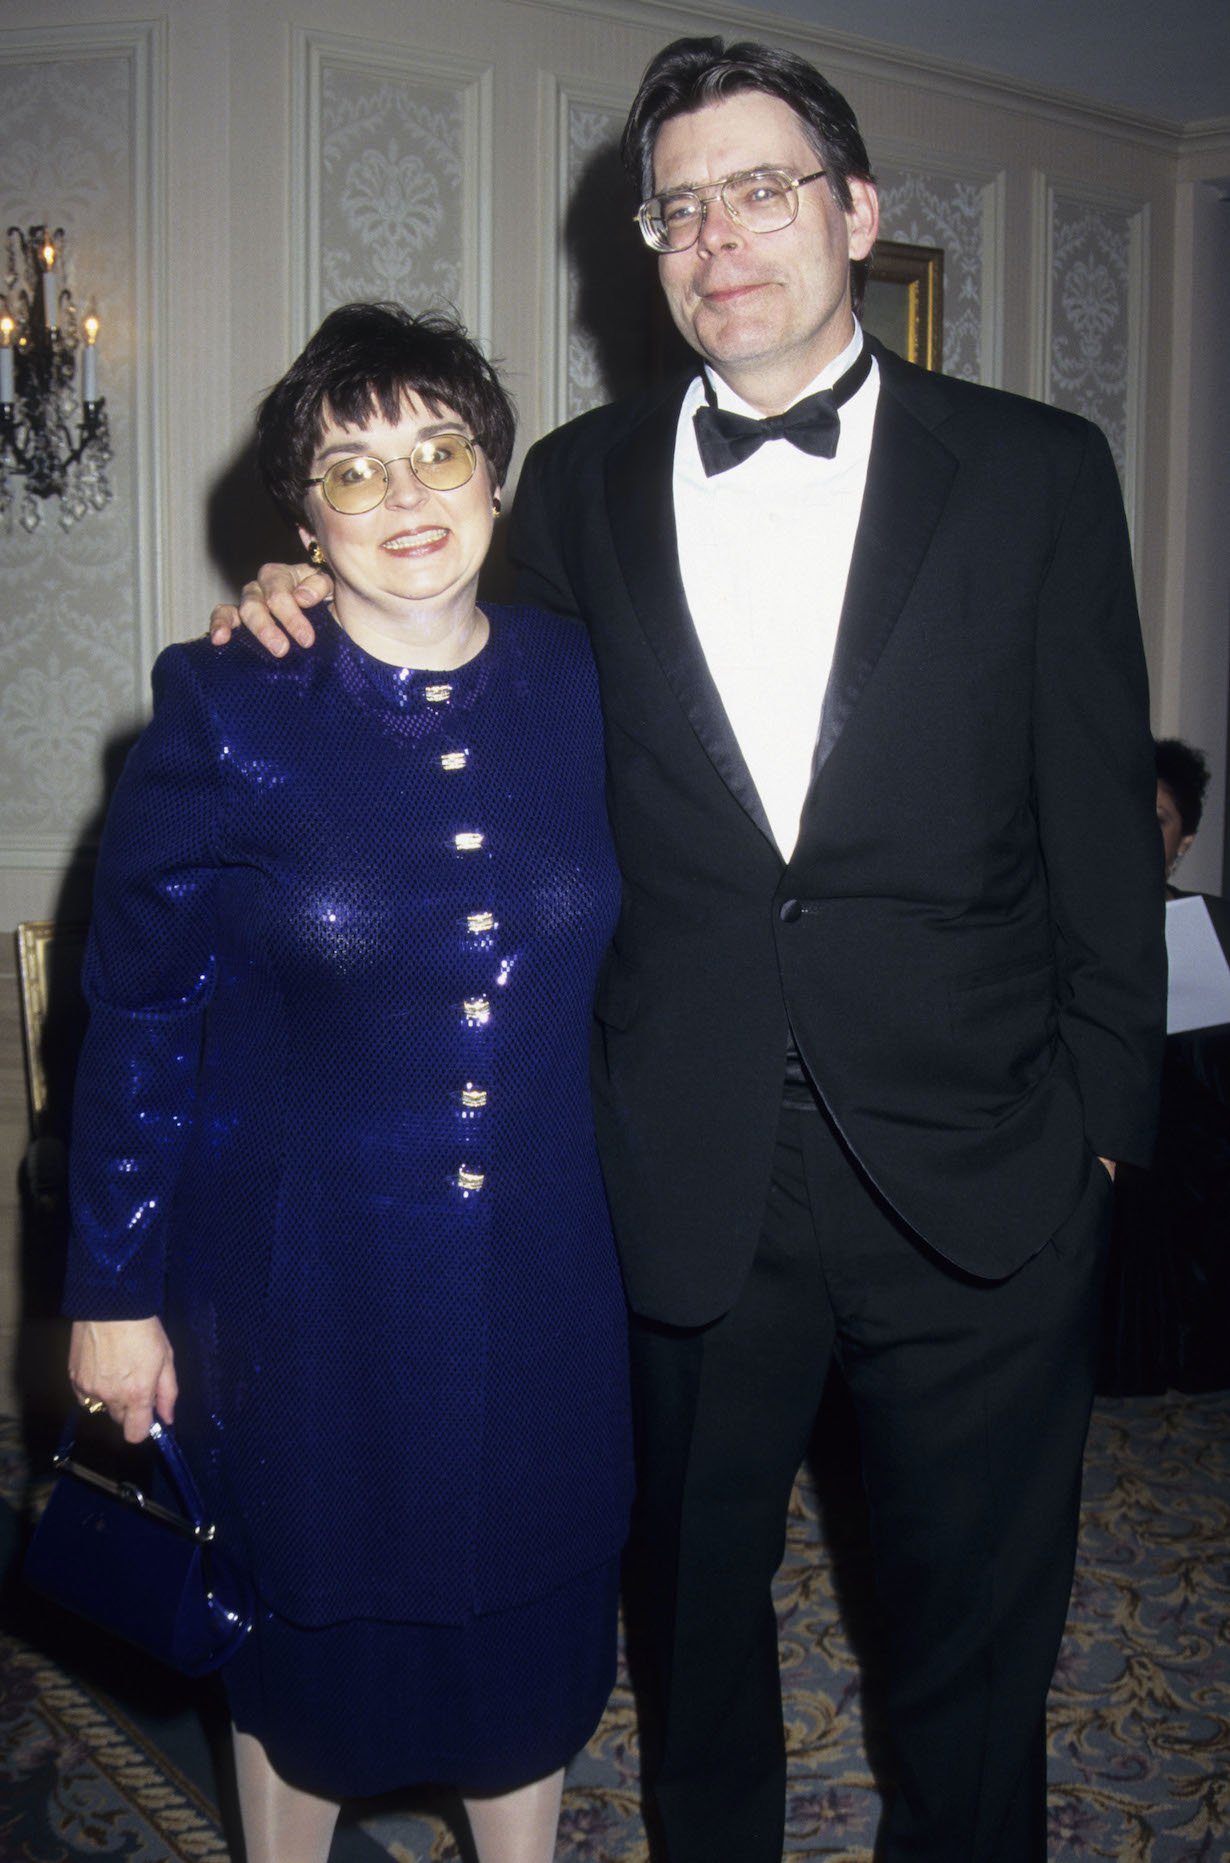 Stephen King and wife Tabitha King attend 17th Annual Salute to Women in Sports Awards on October 21, 1996